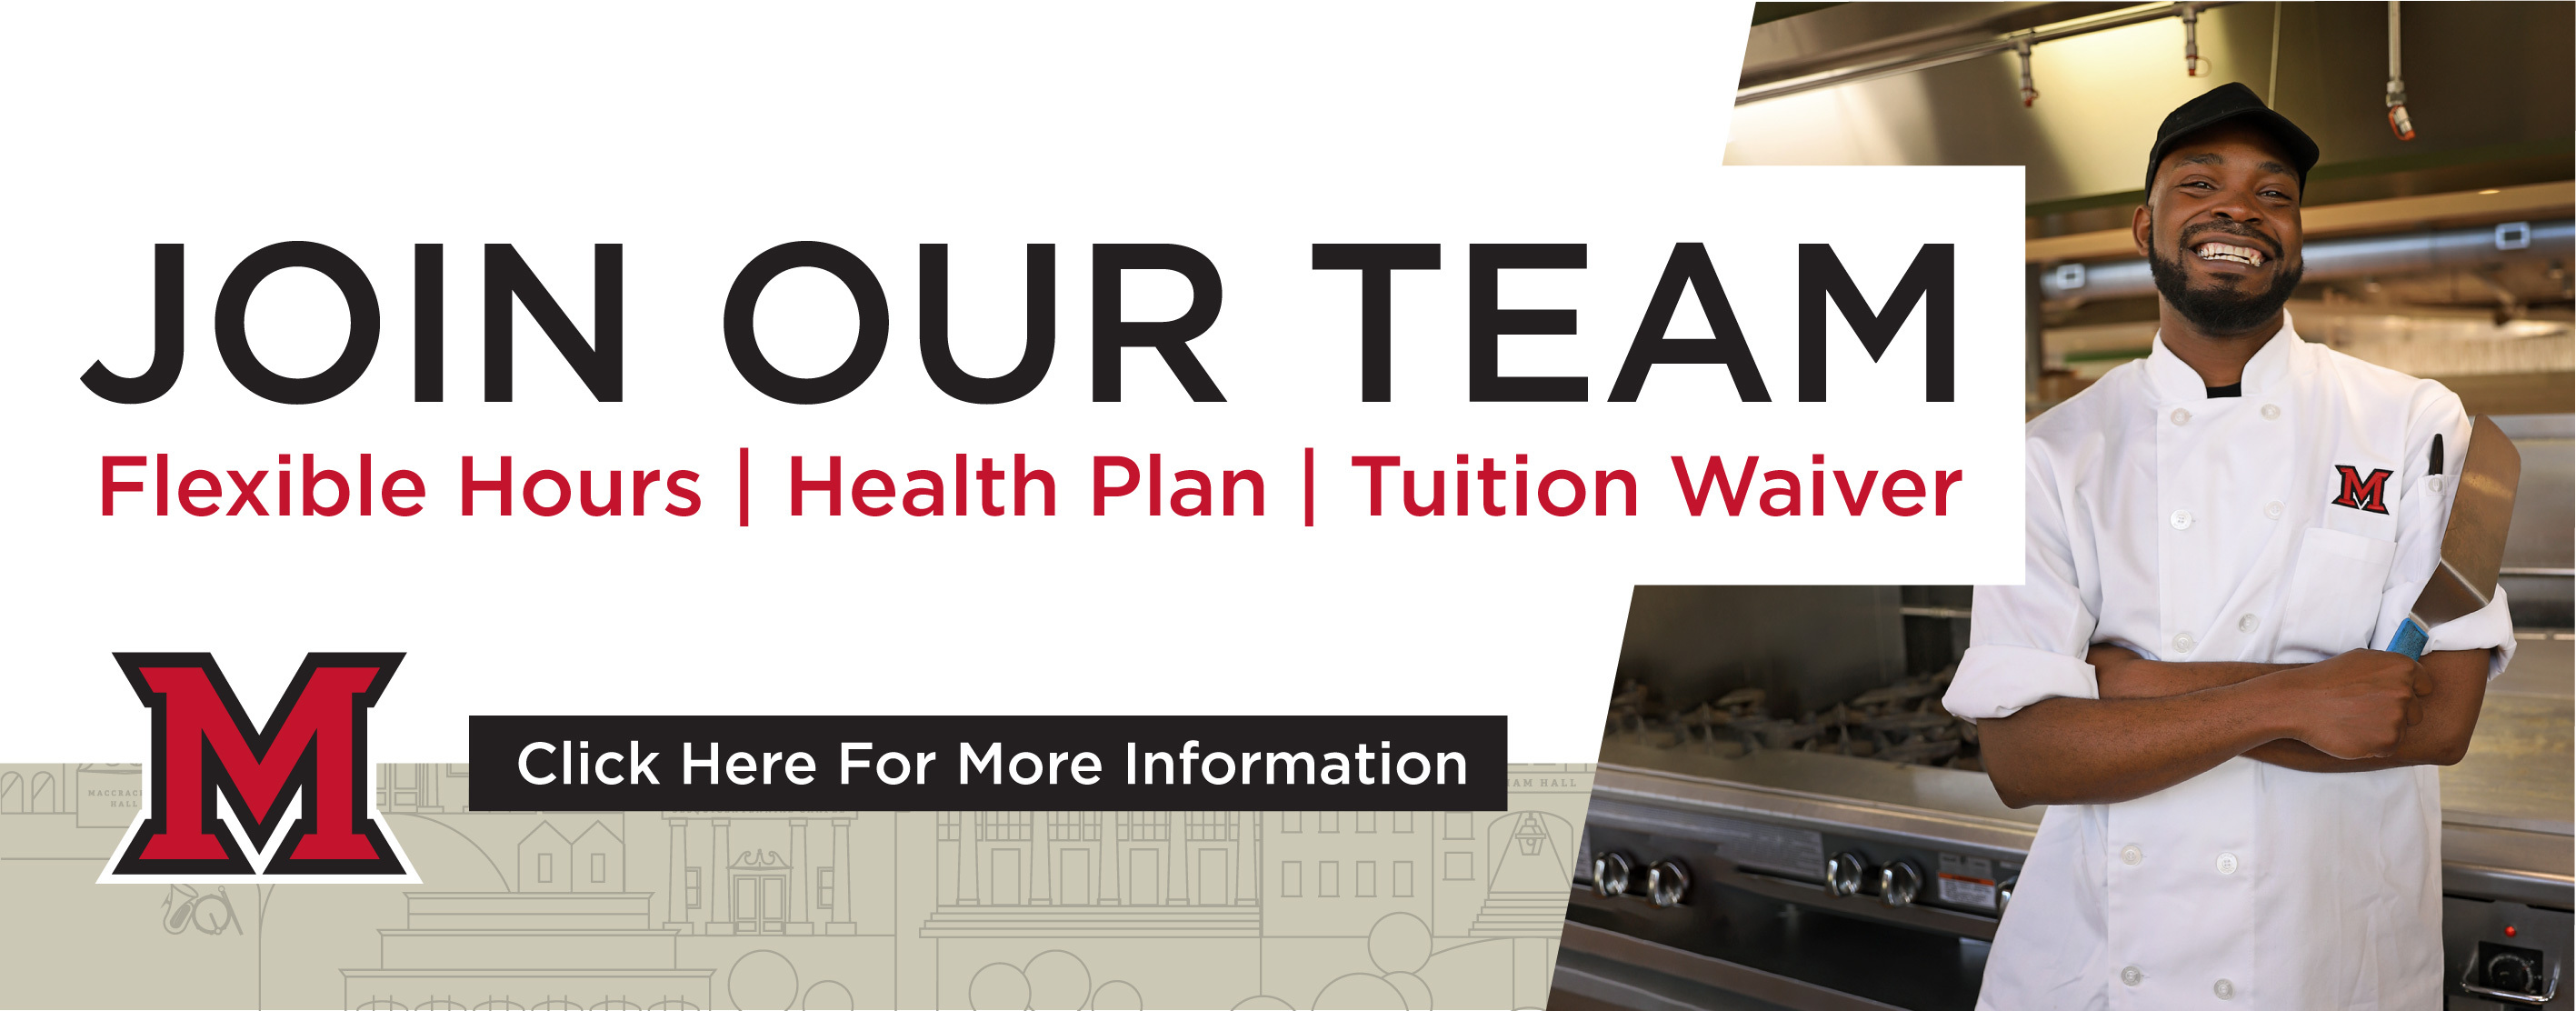  Join Our Team. Flexible Hours | Health Plan | Tuition Waiver. Click here for more information.